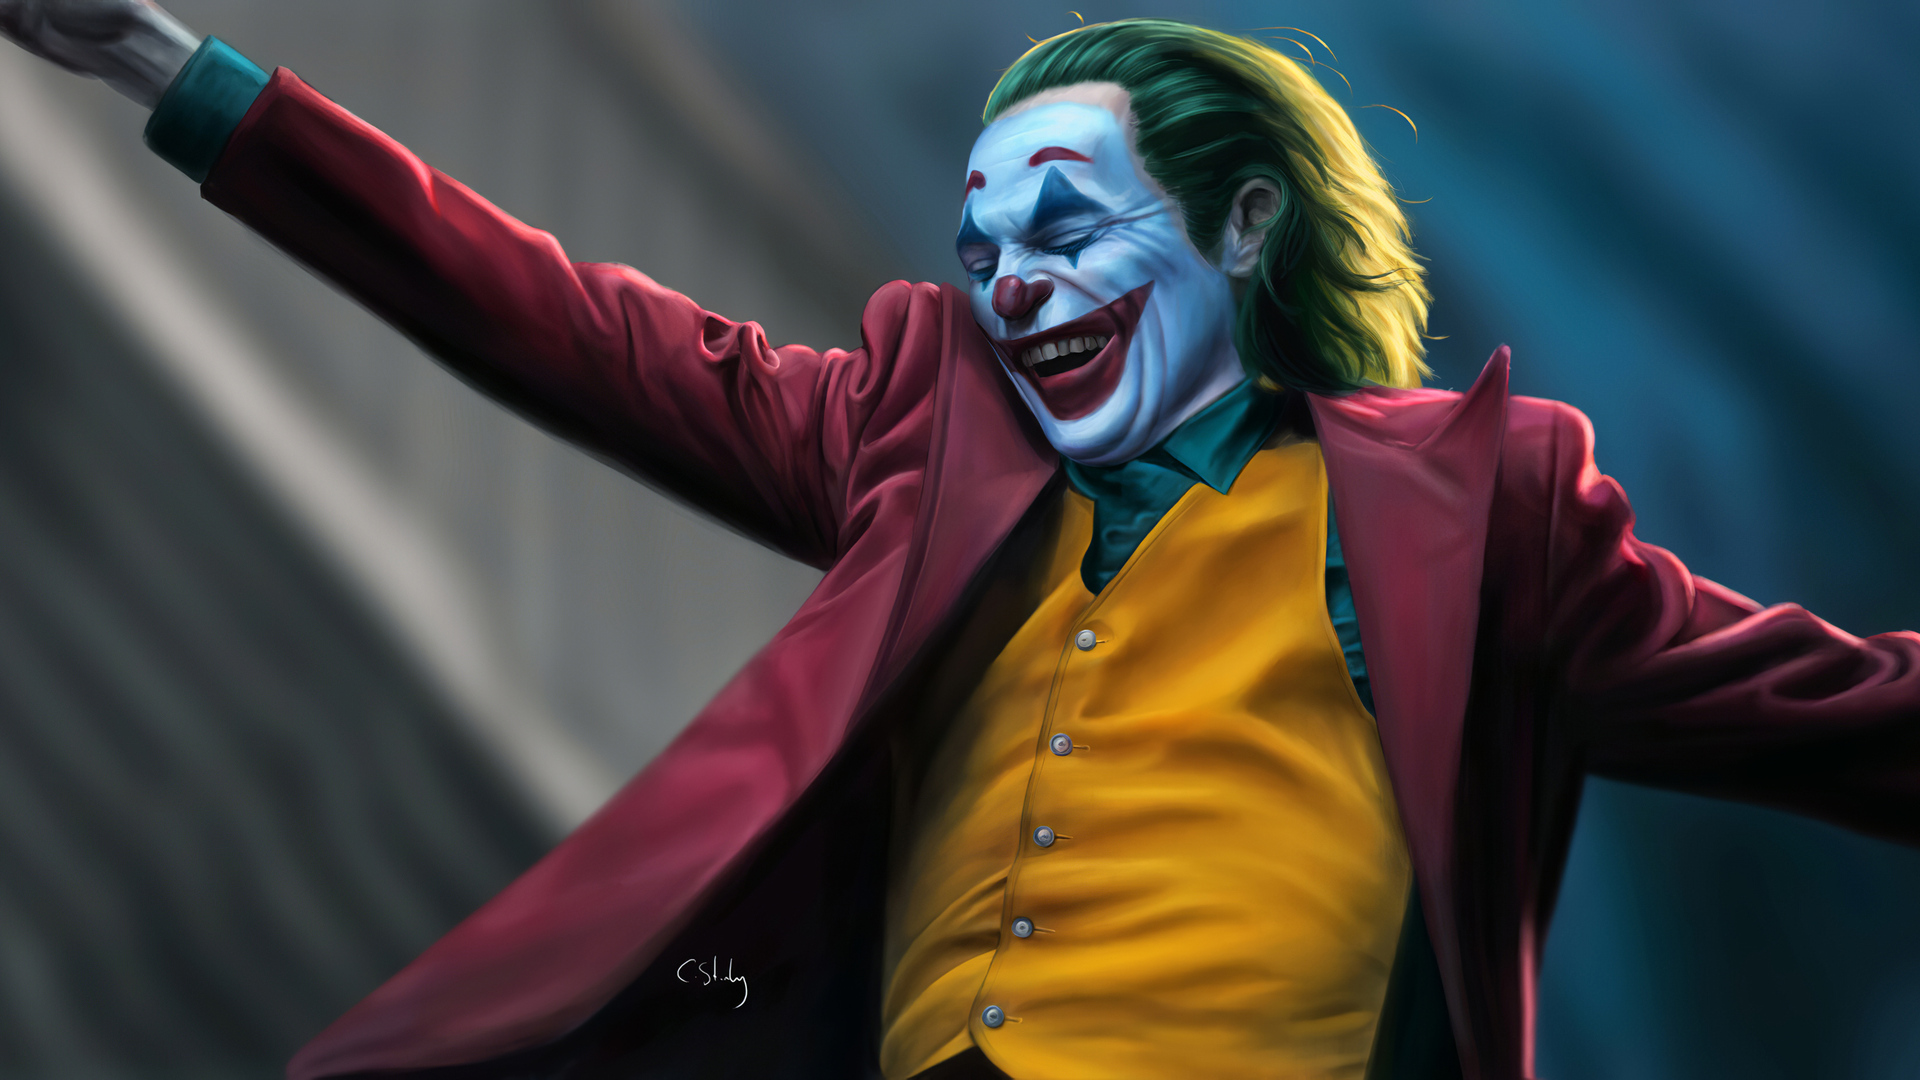 1920x1080 Joker 4k Smile Laptop Full HD 1080P HD 4k Wallpapers, Images,  Backgrounds, Photos and Pictures